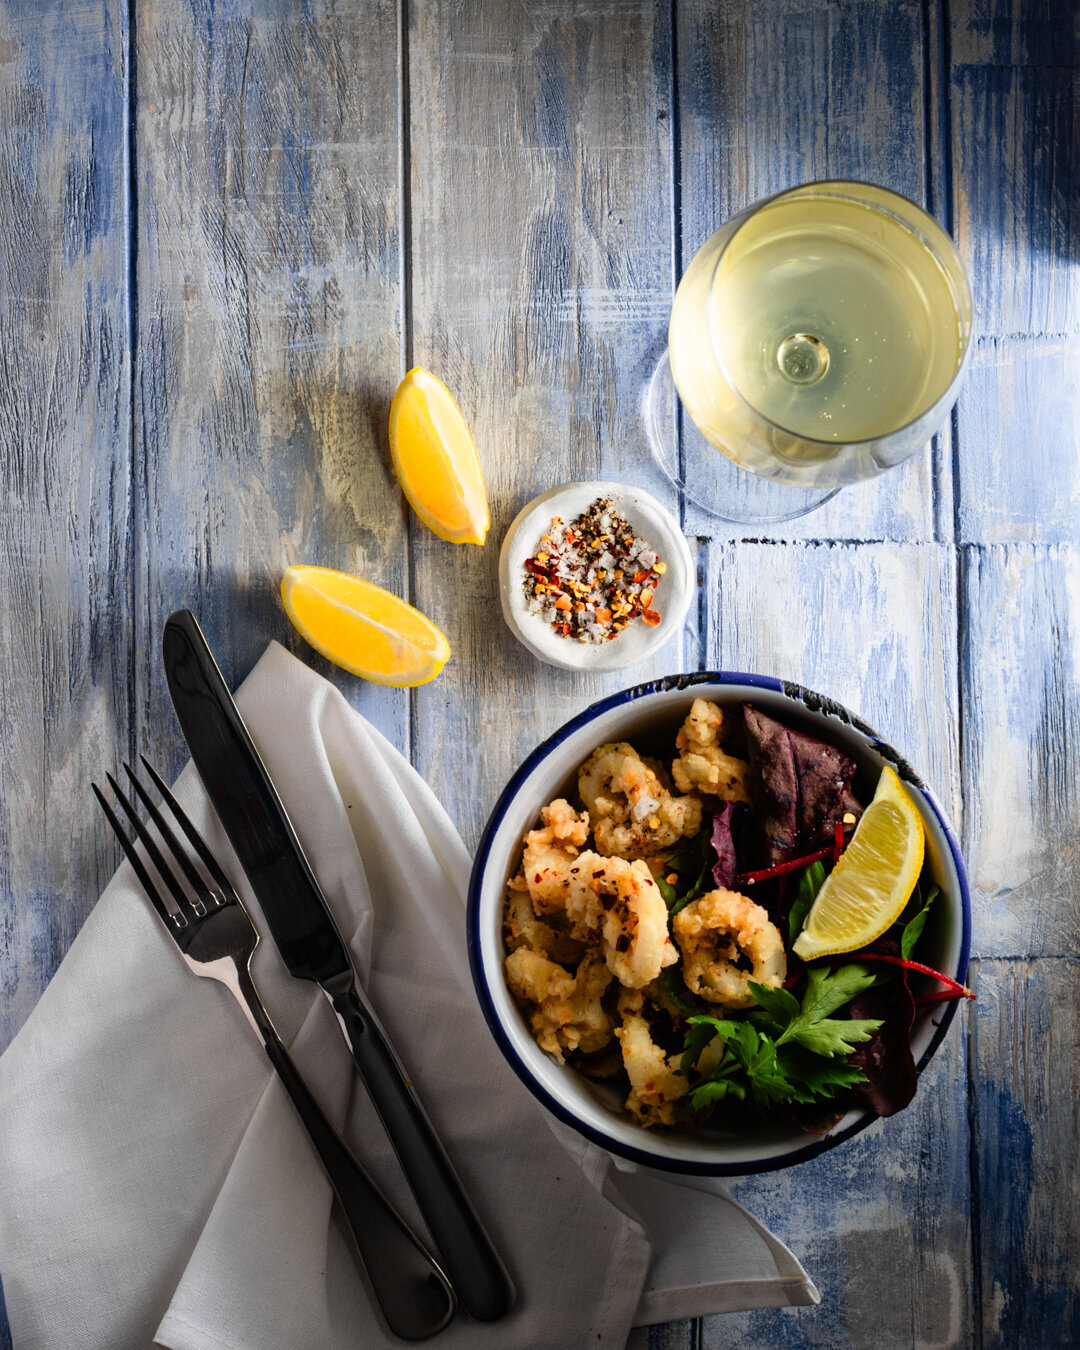 A bowl of deep fried Calamari with salt and chilli seasoning on a restaurant table with napkin, cutlery and glass of white wine with lemon wedges